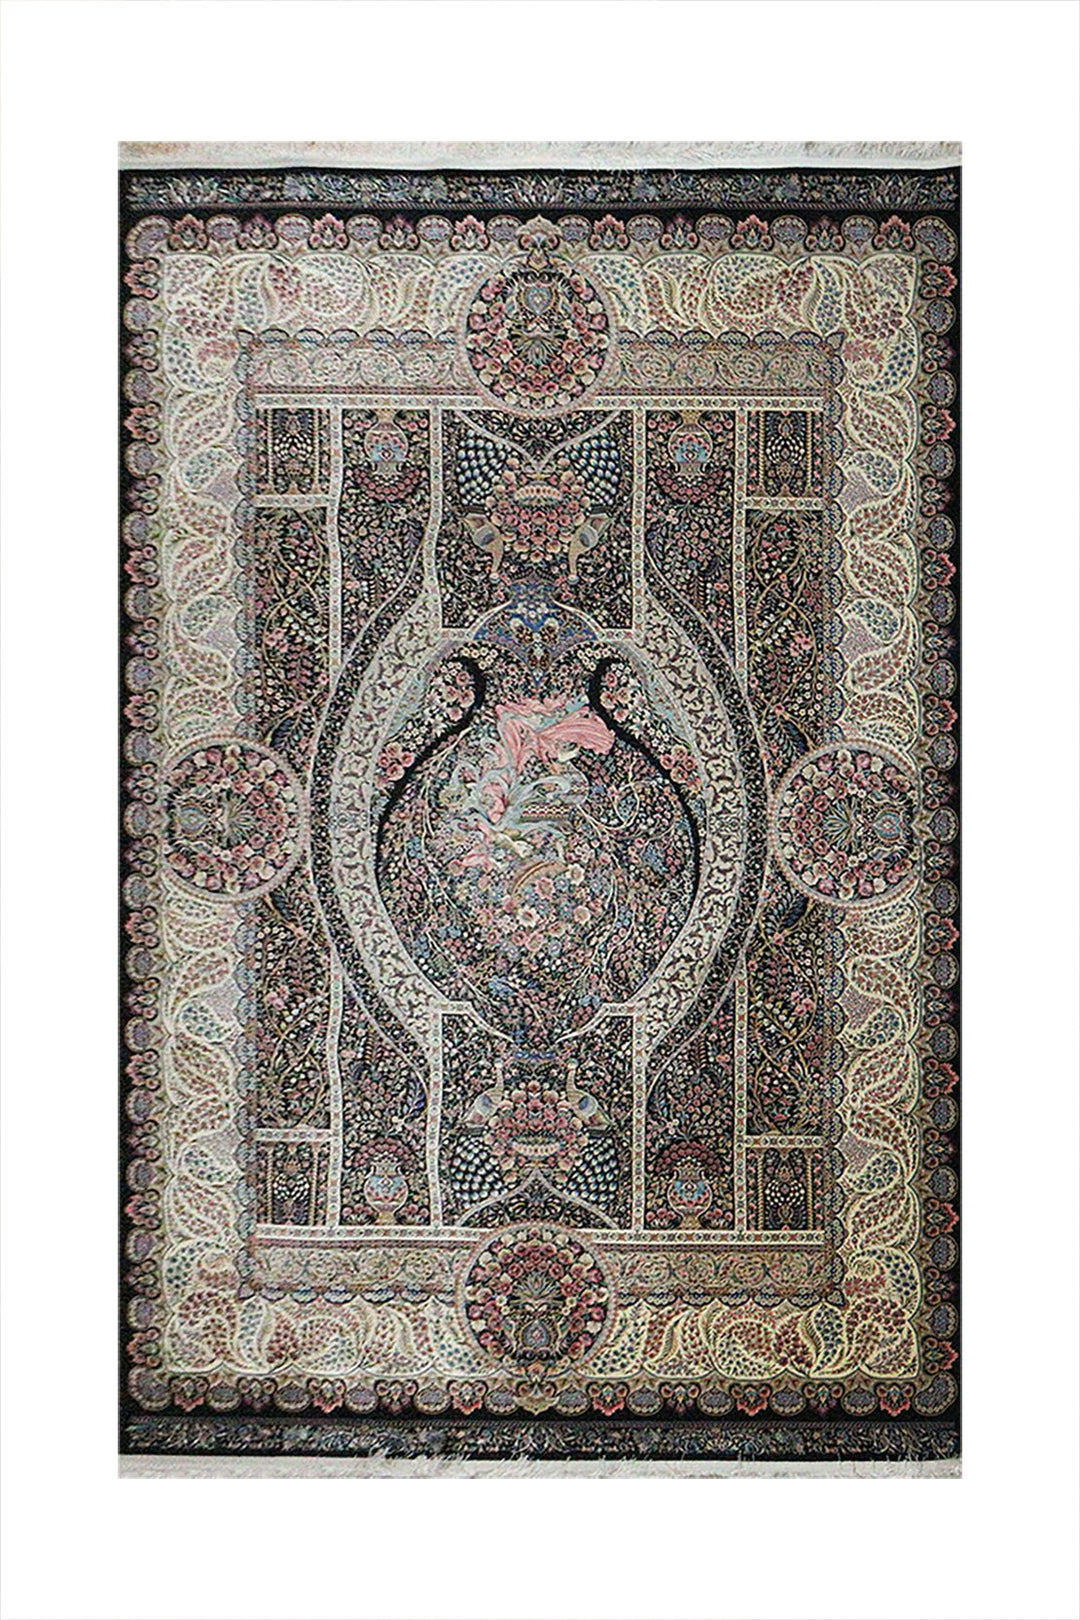 Iranian Premium Quality Silk 1500 Rug - 6.5 x 9.8 FT - Blue - Resilient Construction for Long-Lasting Use - V Surfaces